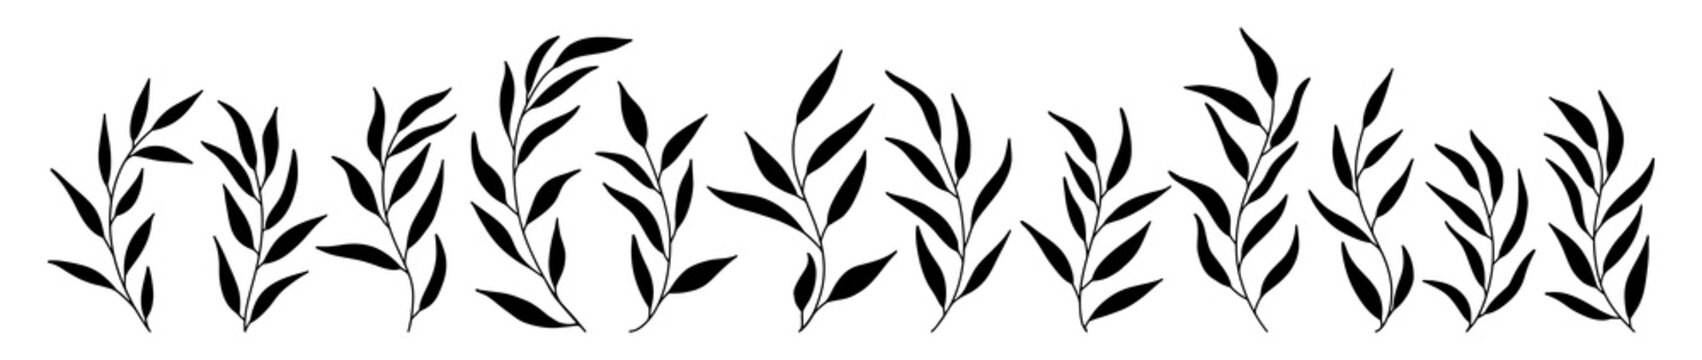 Silhouettes of long leaves of olive set. Vector hand drawn illustration in simple scandinavian doodle cartoon style. Isolated black branches on a white background.